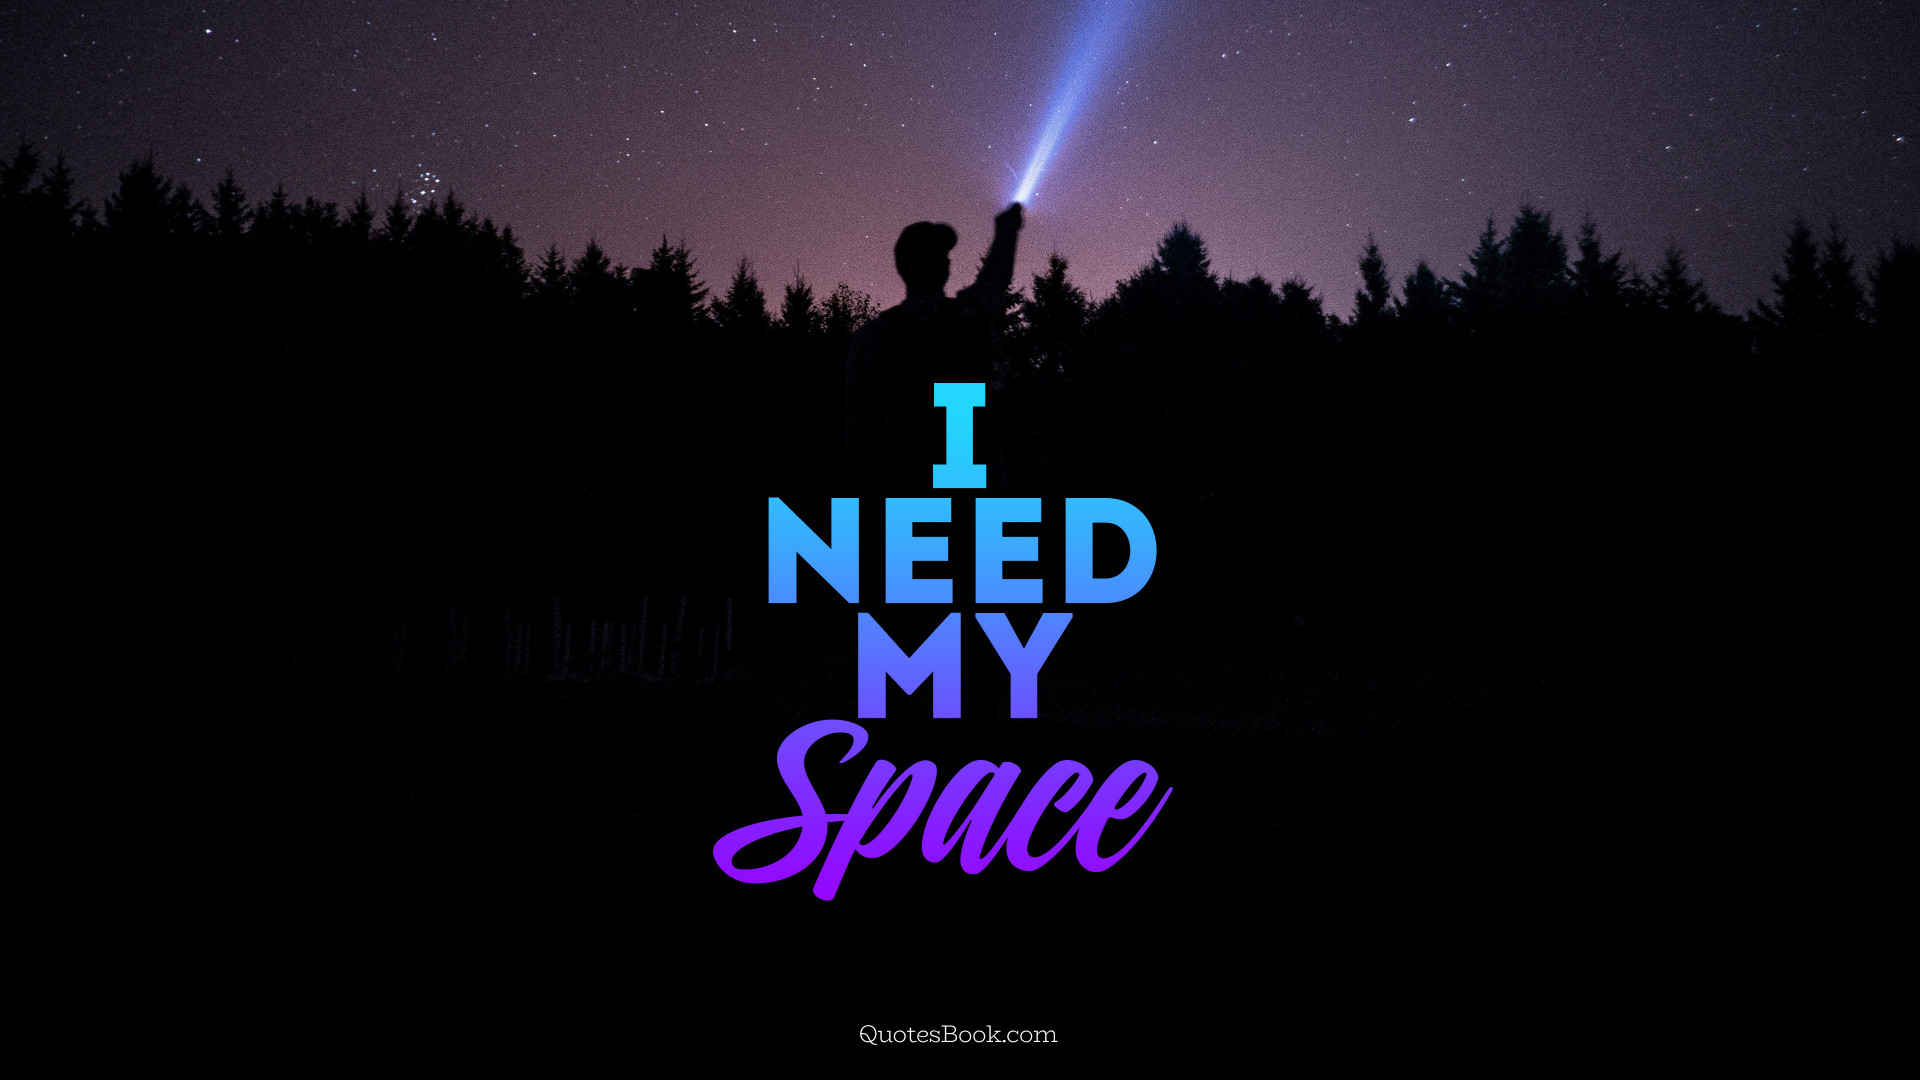 I need my space - QuotesBook